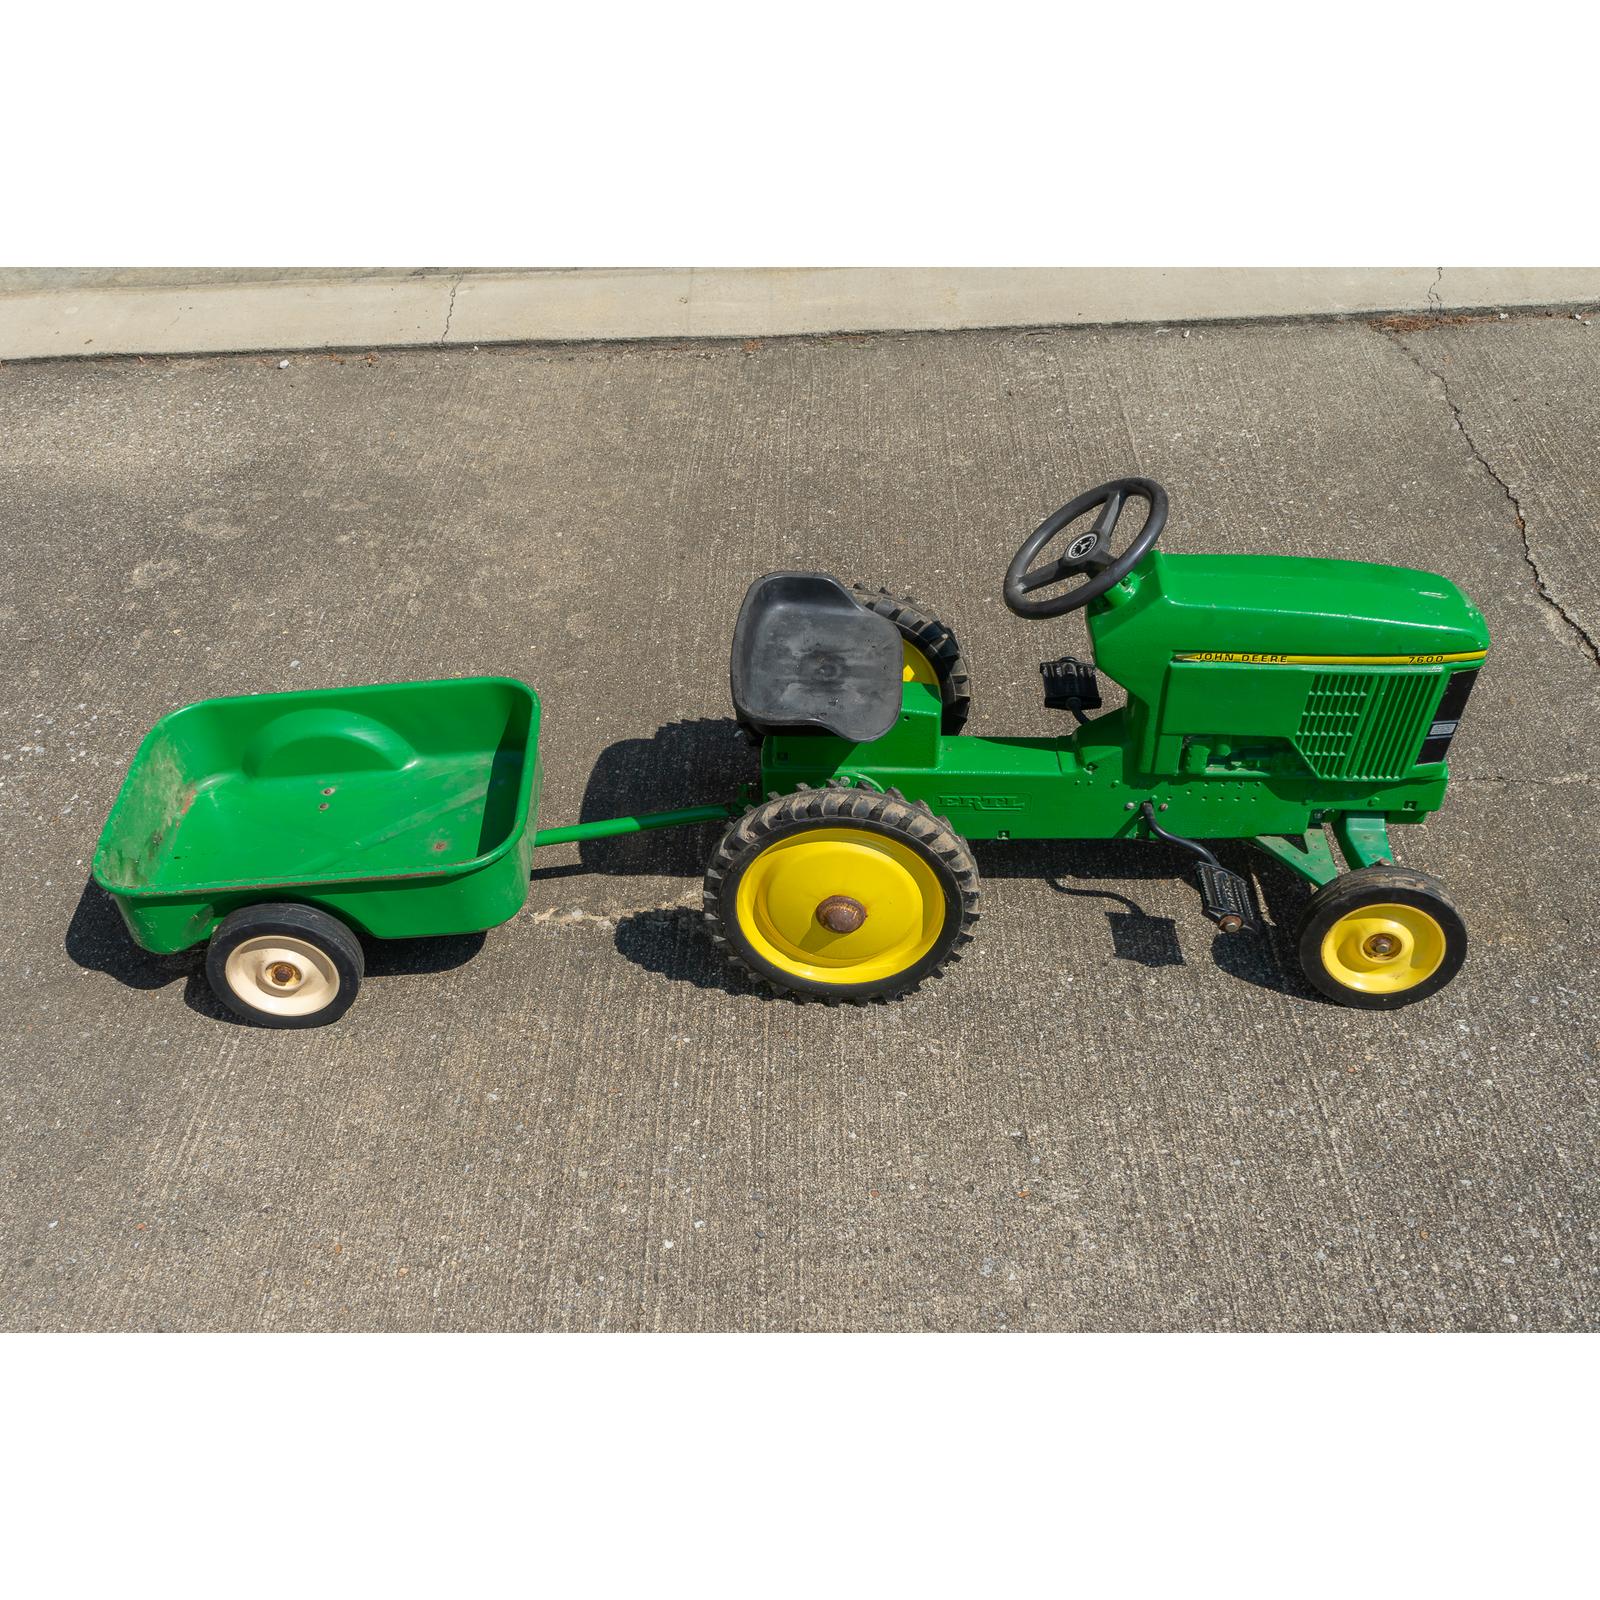 Ertl John Deere Toy Pedal Tractor With